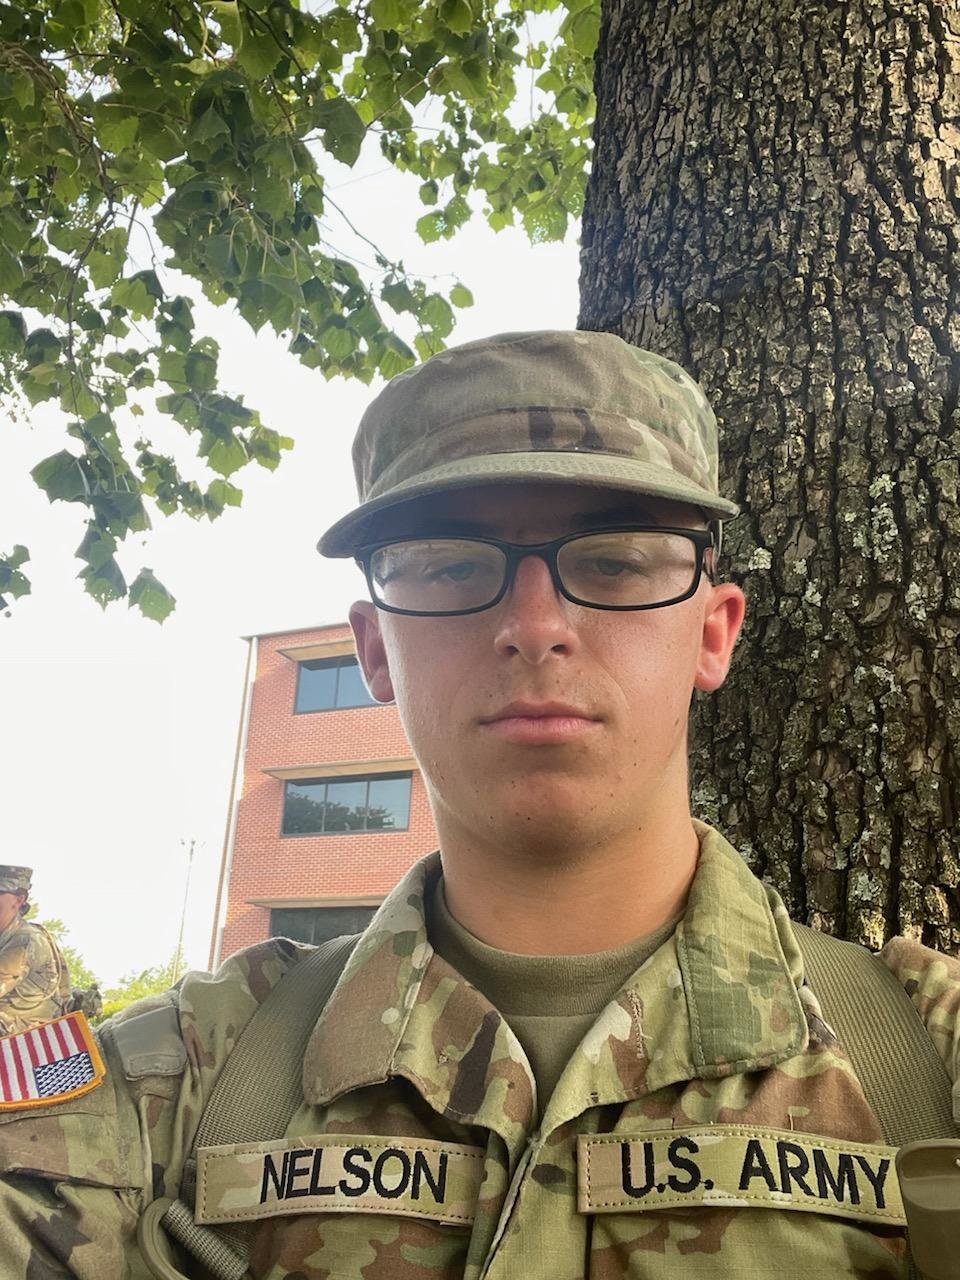 Montgomery County senior Matthew Nelson graduated from an Army National Guard boot camp at Fort Leonard Wood on Aug. 18.